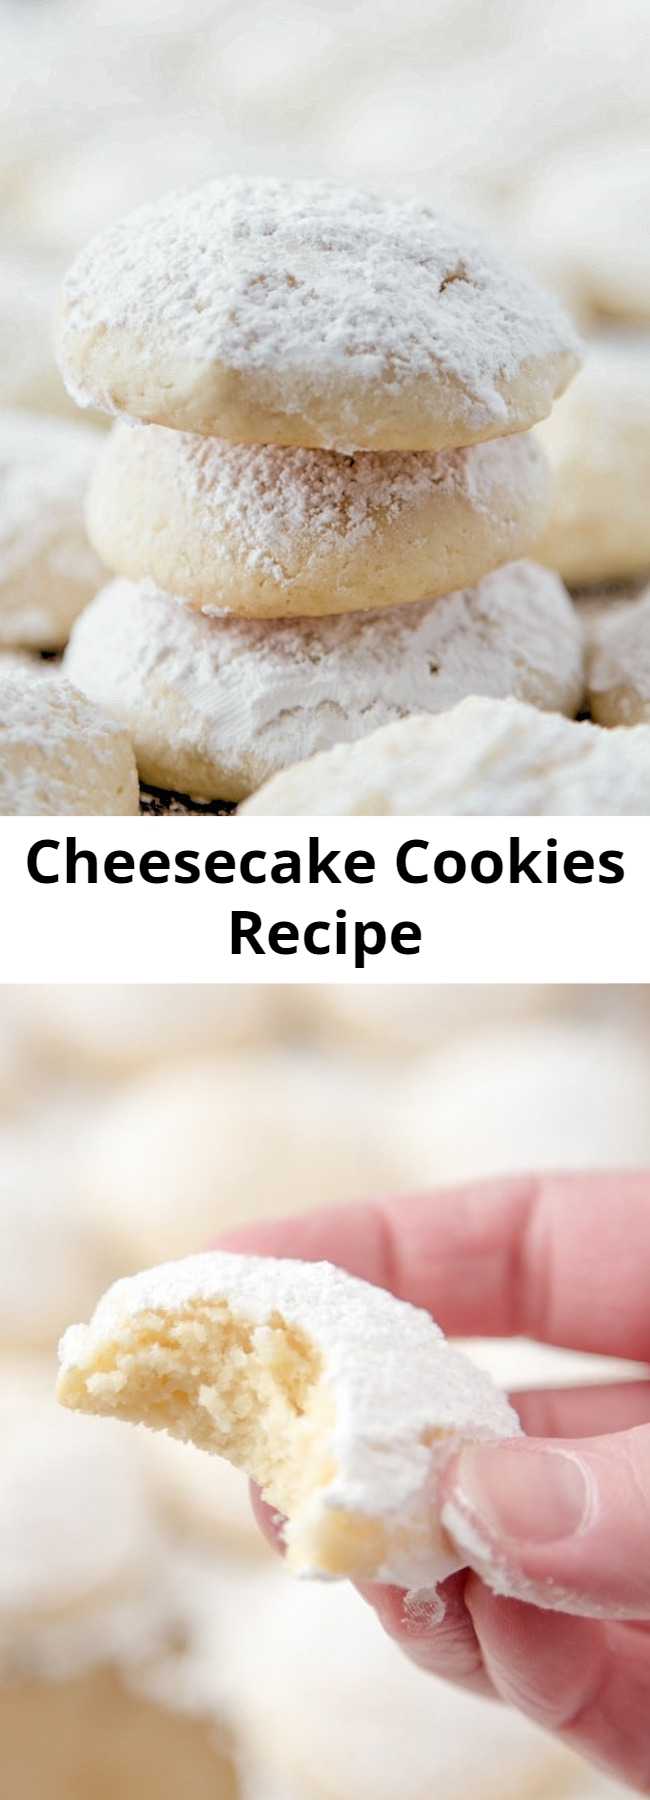 Easy Soft Cheesecake Cookies Recipe - These Cheesecake Cookies are so creamy and tender. It’s a delicious cookie recipe that’s not too sweet but totally addictive!